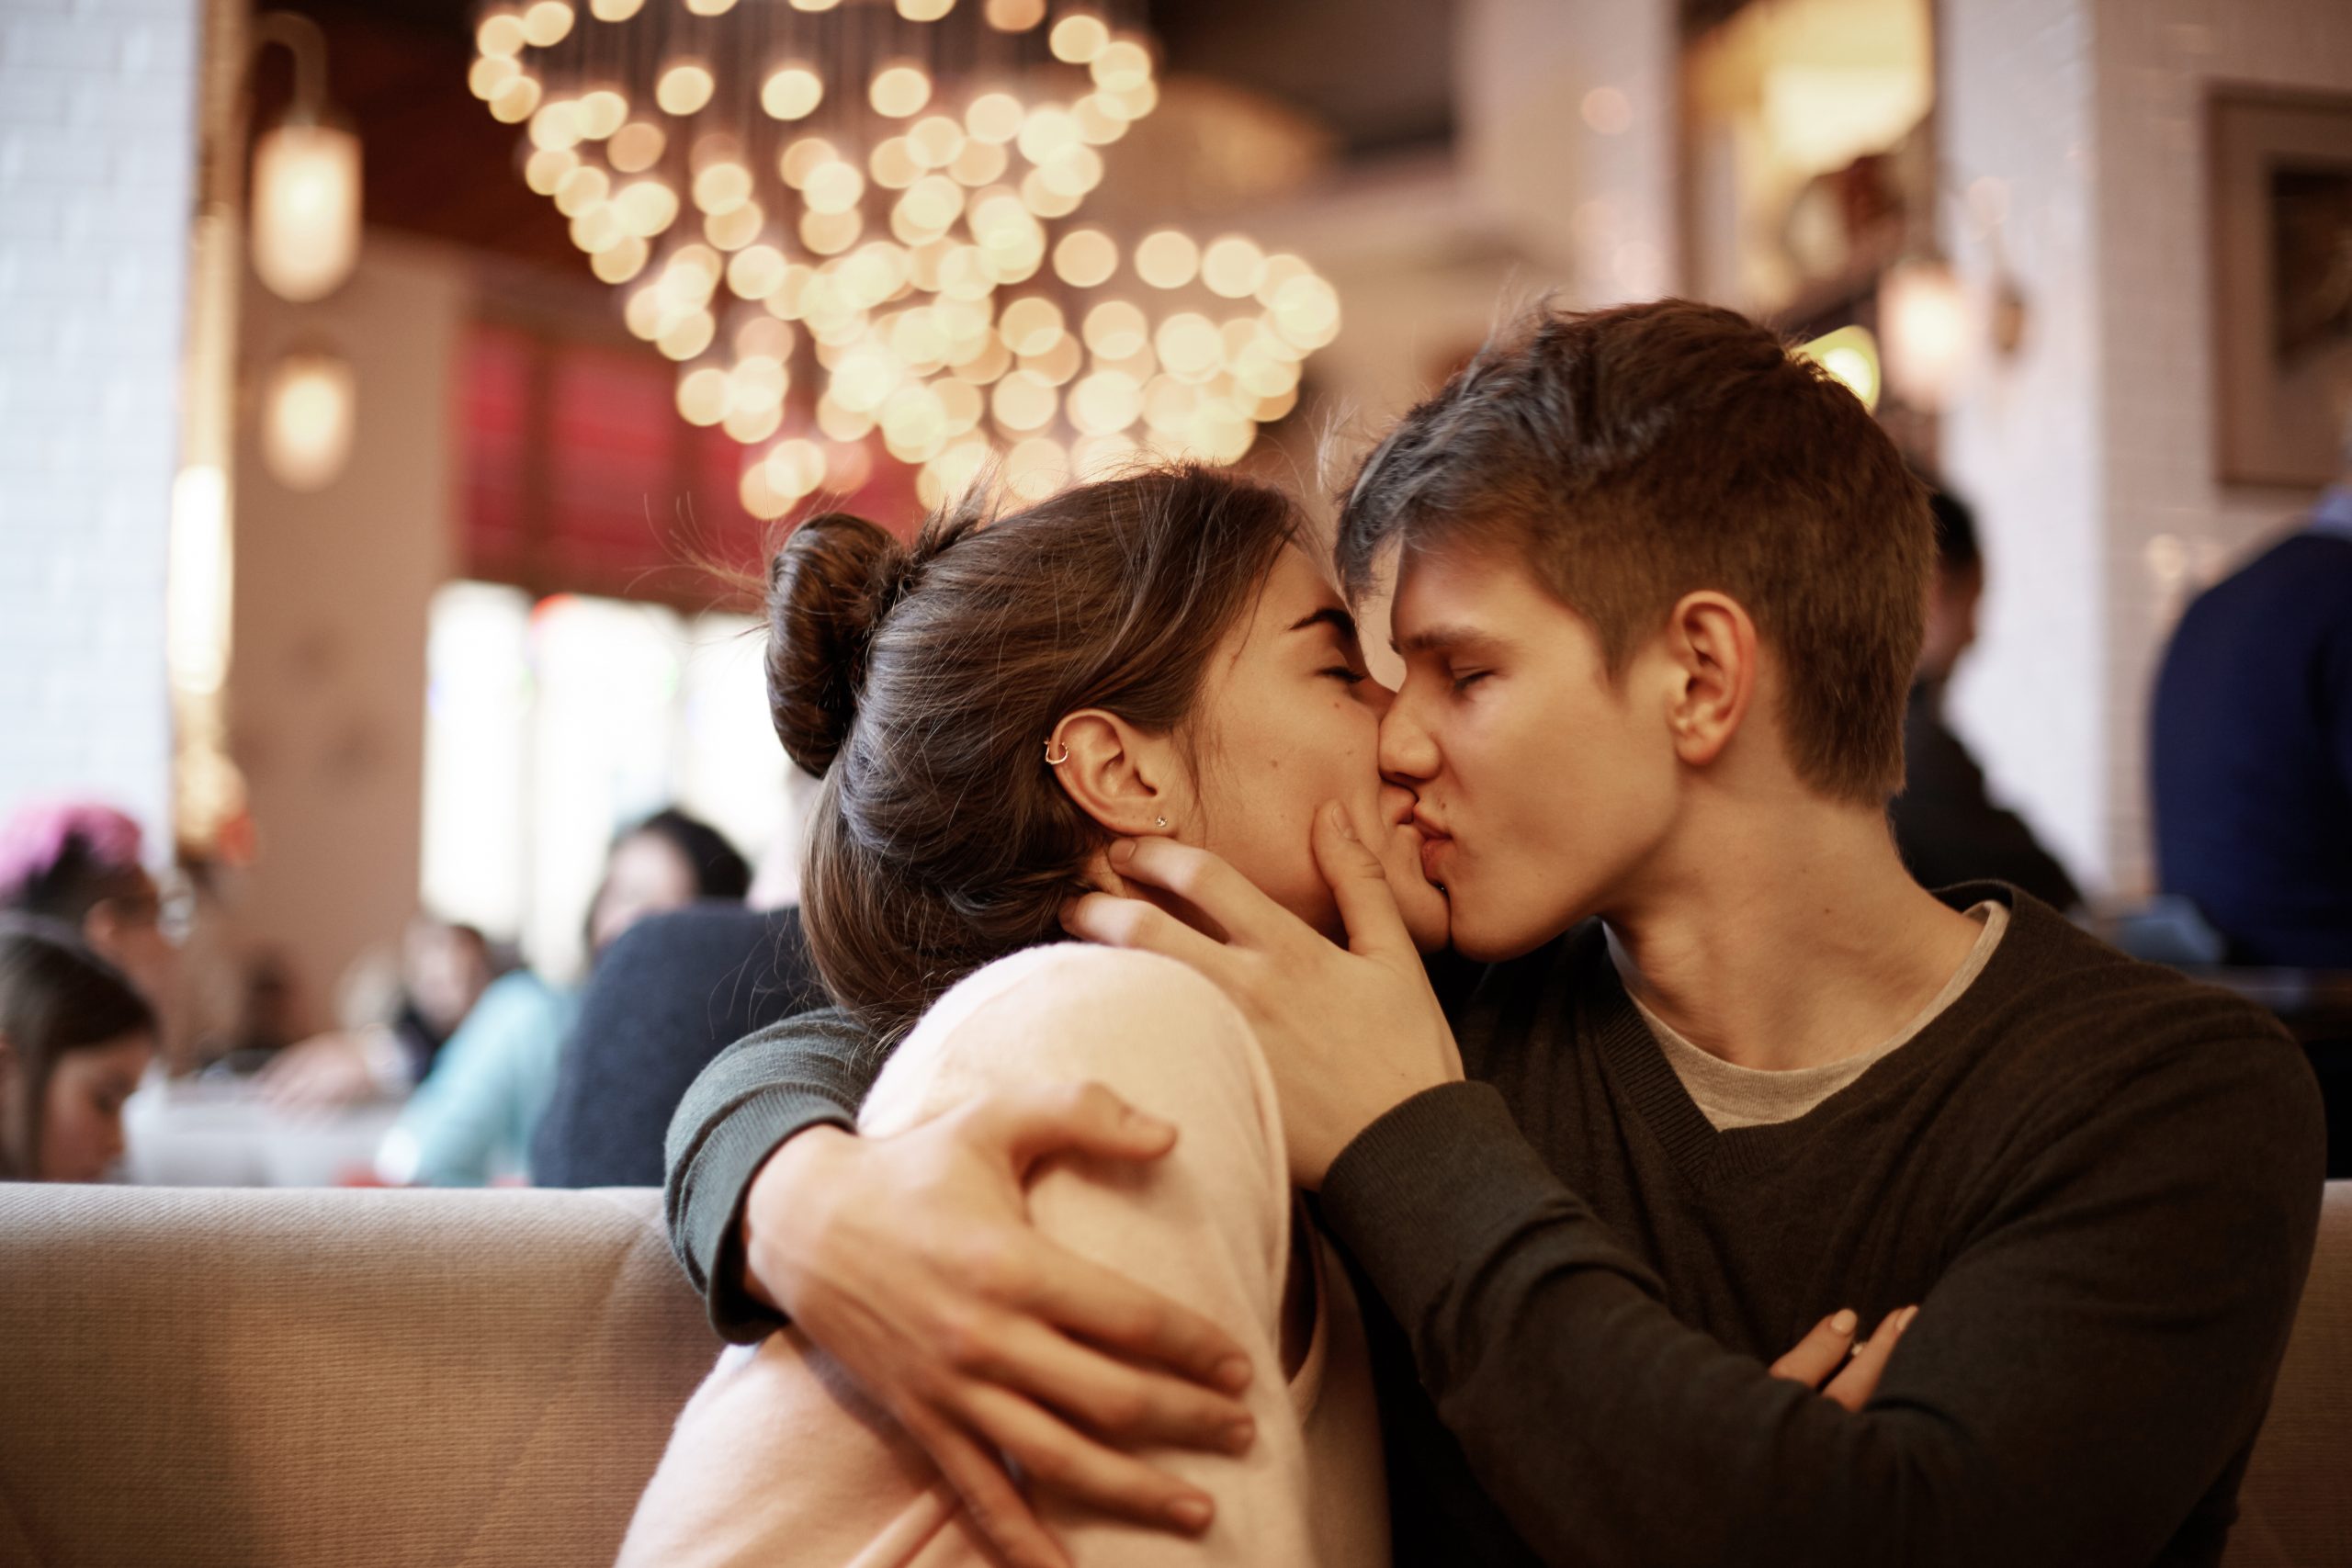 Candid shot of cute loving young couple relaxing at cafeteria on Valentine’s Day. Handsome guy holding tight his charming girlfriend and kissing her with fondness while waiting for lunch at cafe